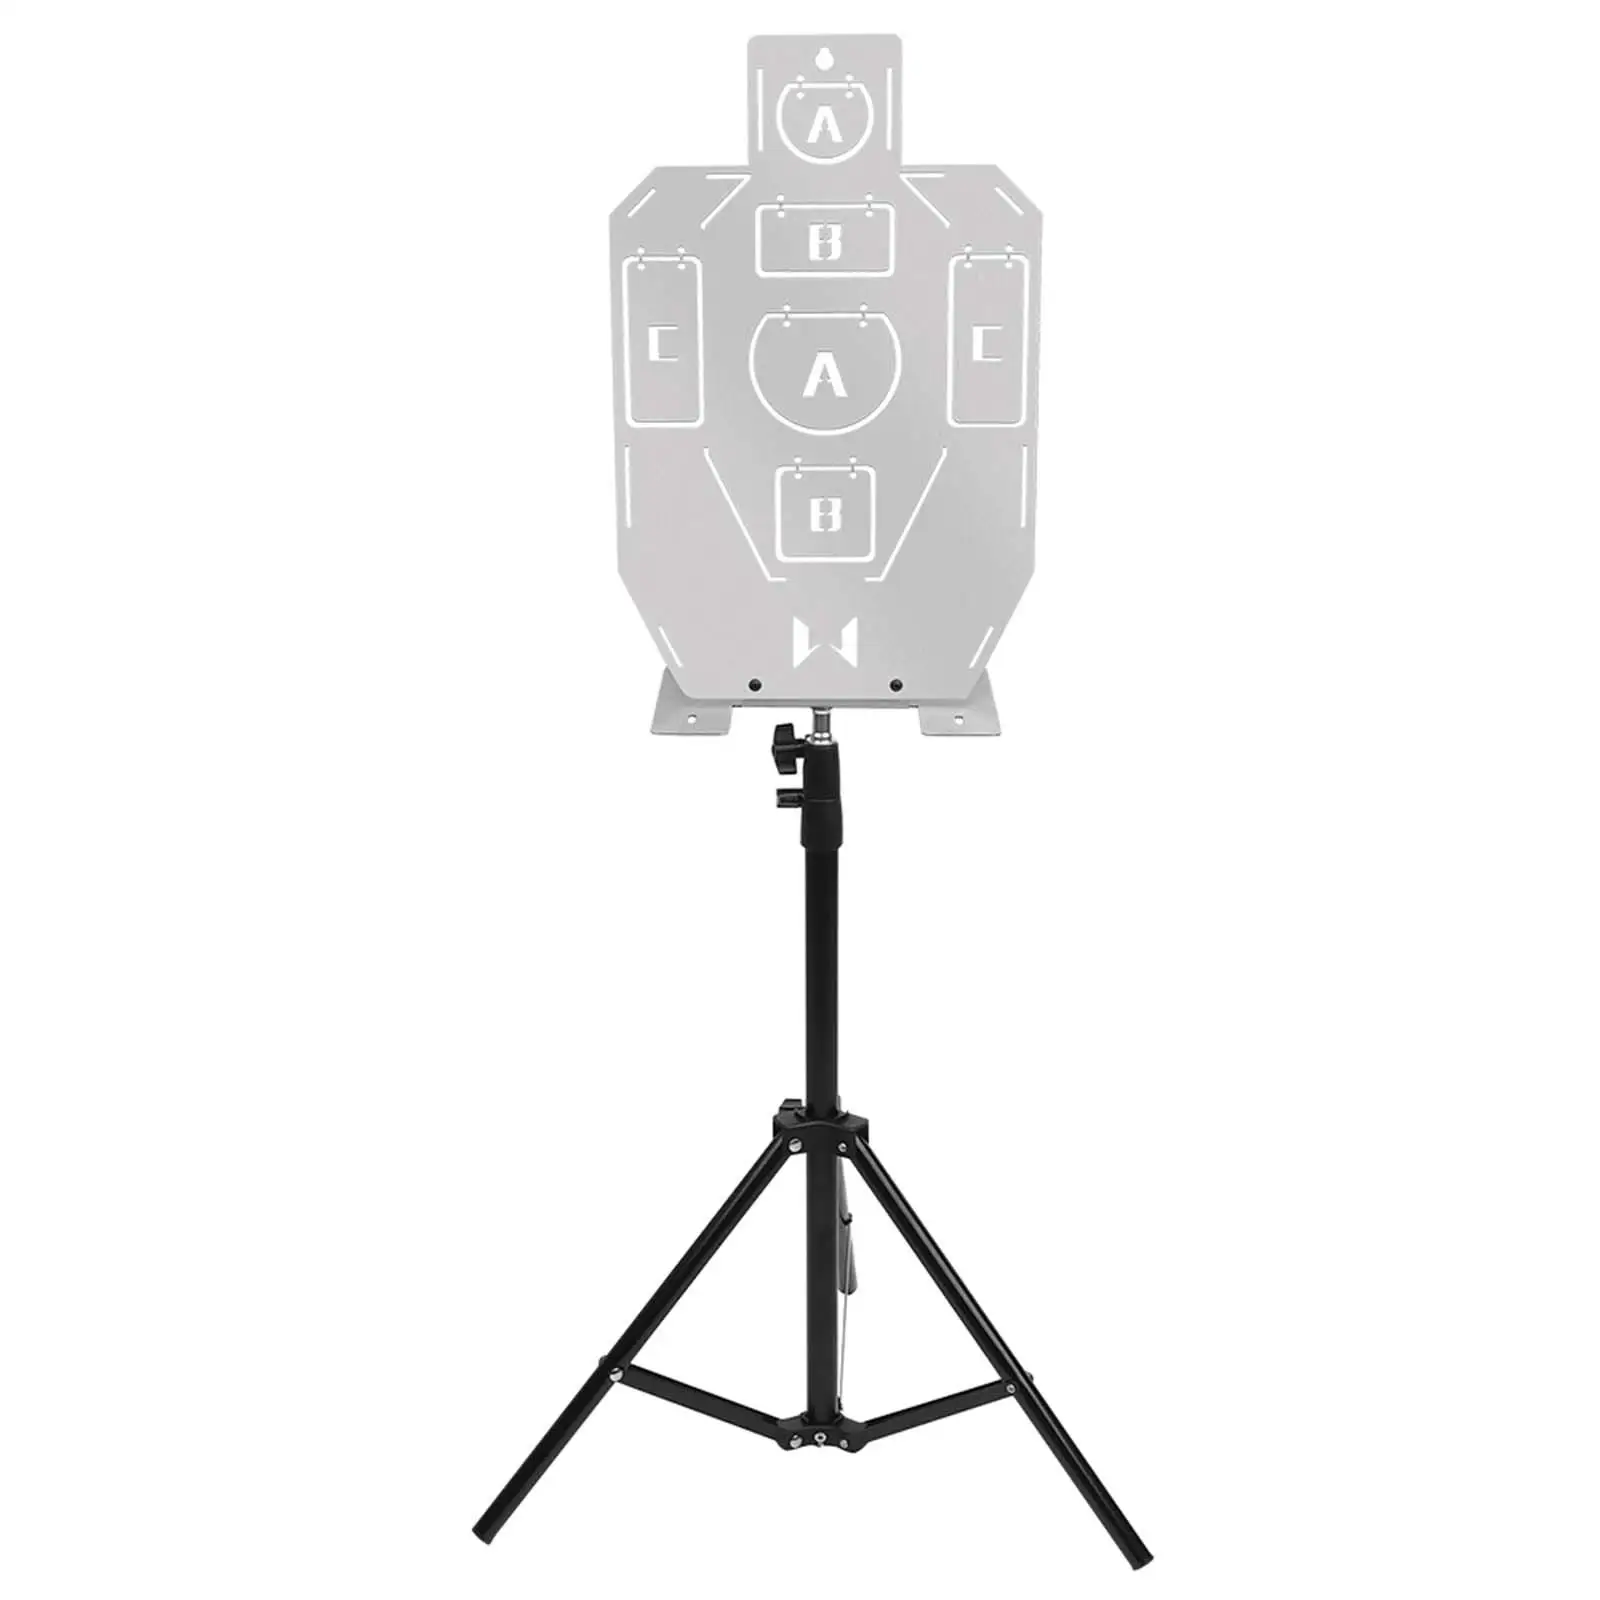 Stainless Steel Silhouette Target Training Target